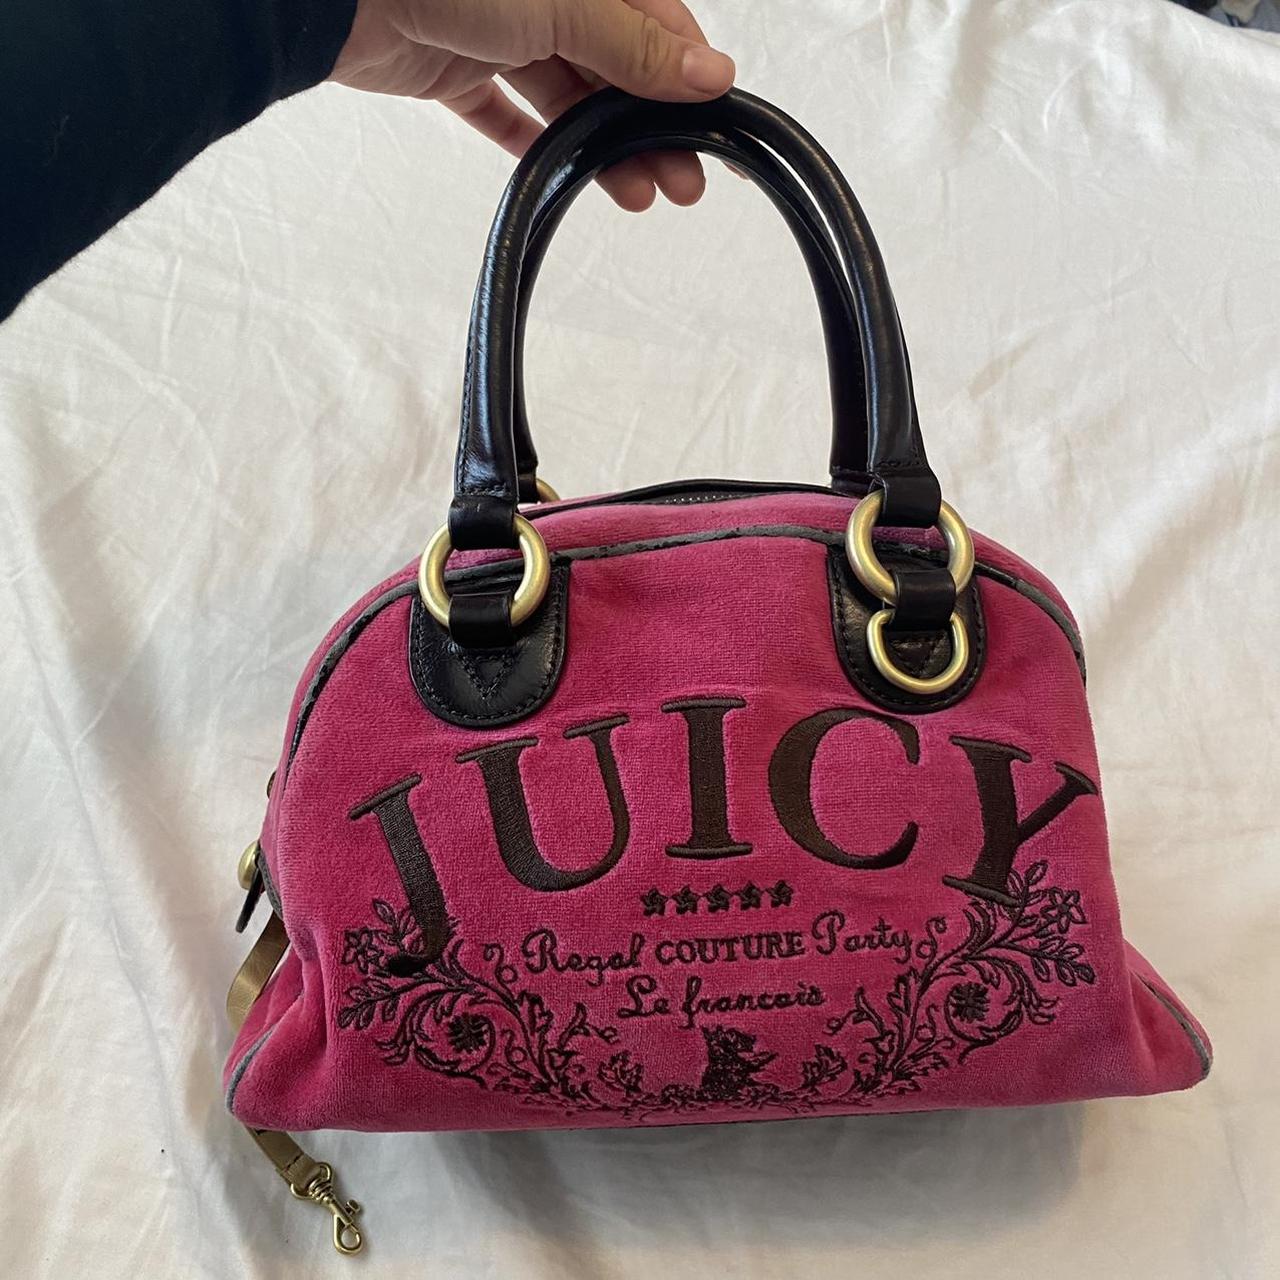 Juicy purse In really good condition besides the... - Depop